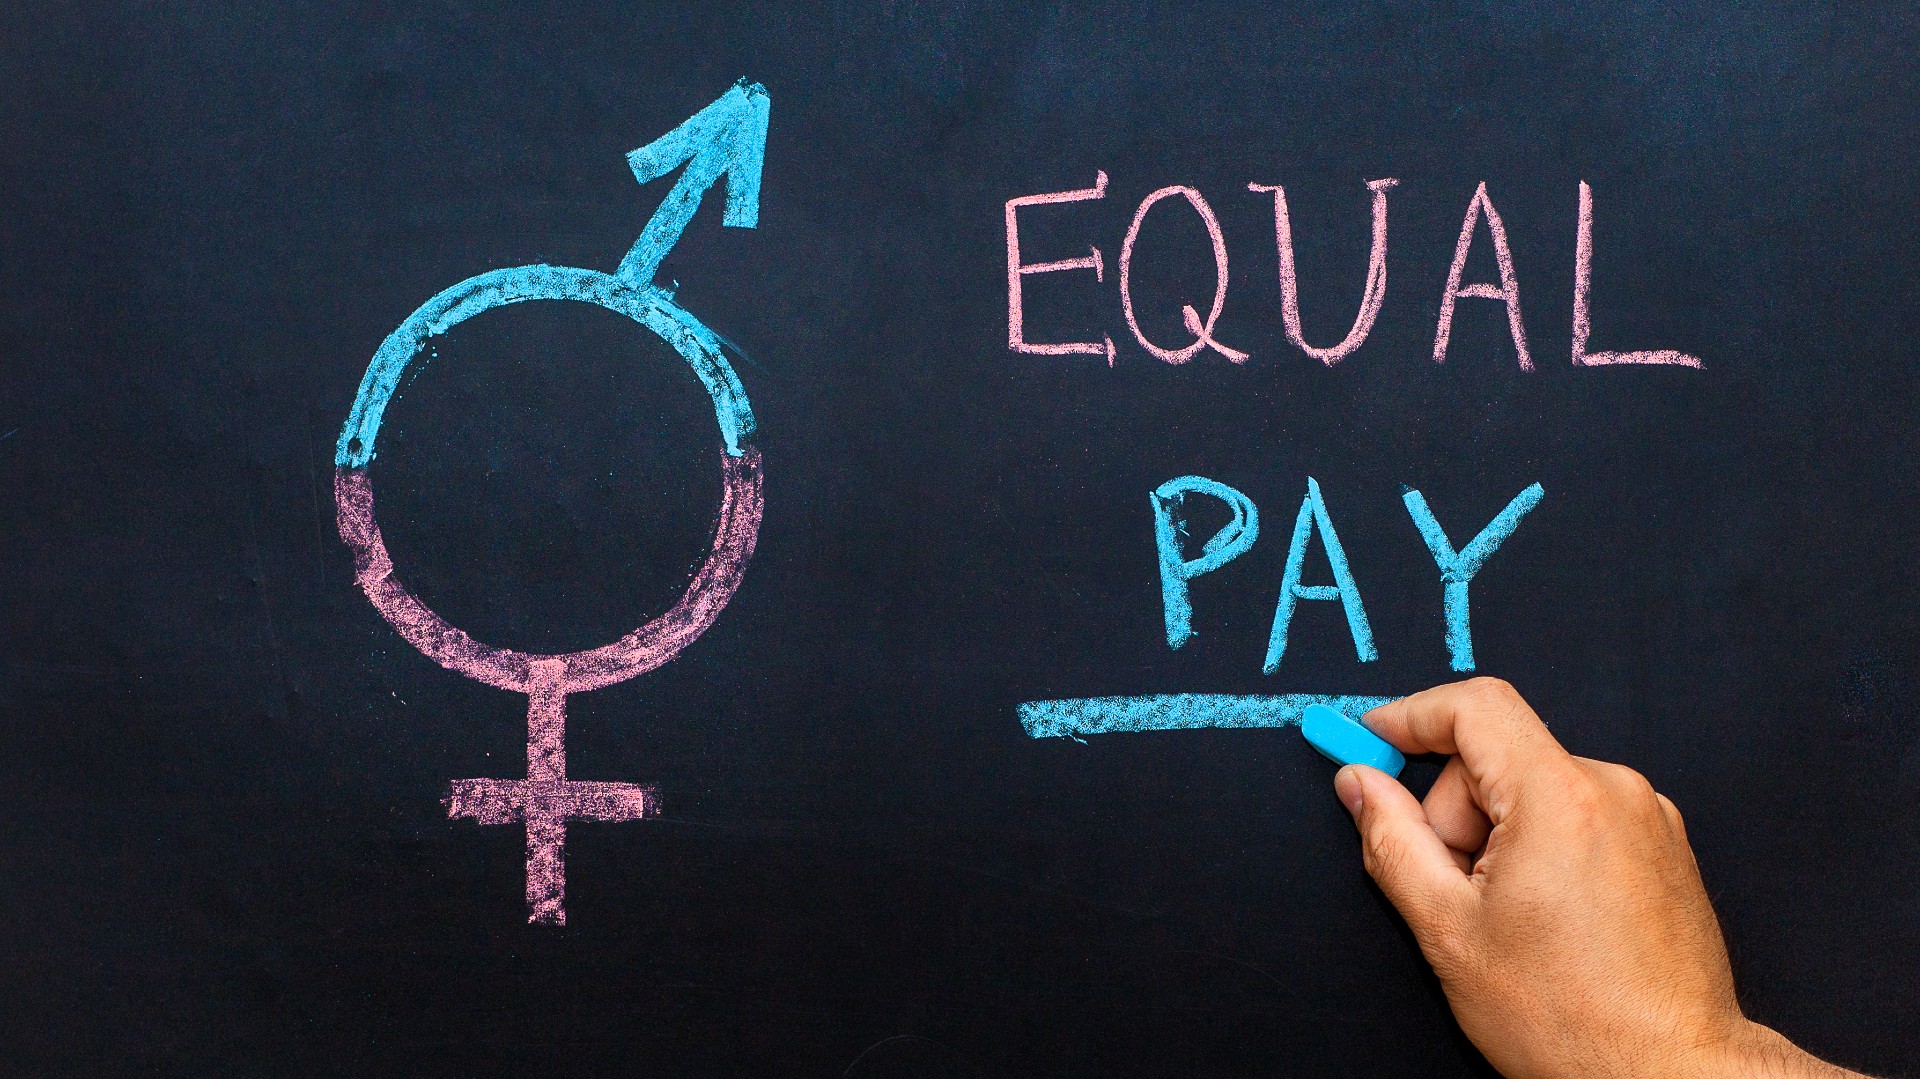 New Code of Practice on Equal Pay